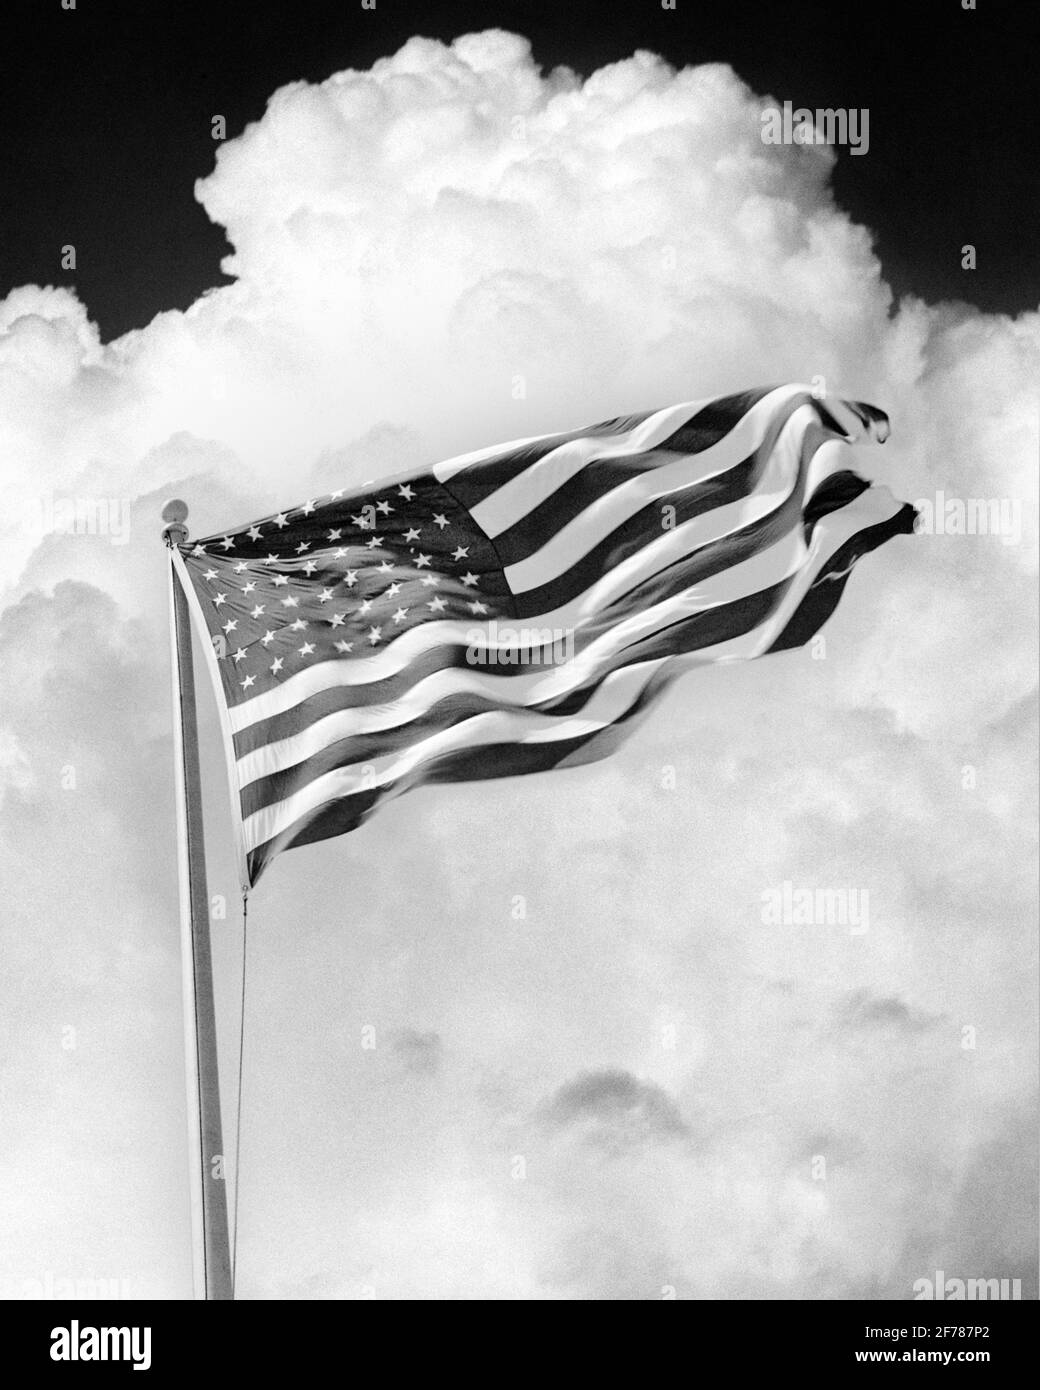 1930s 1940s HIGH BILLOWING CUMULUS CLOUDS BEHIND WAVING IN WIND 48 STAR NATIONAL BANNER OF THE UNITED STATES OF AMERICA - h2417b HAR001 HARS BANNER PROTECTION STRENGTH COURAGE CHOICE EXCITEMENT KNOWLEDGE LEADERSHIP LOW ANGLE POWERFUL PUFFY WORLD WARS INNOVATION PRIDE WORLD WAR WORLD WAR TWO WORLD WAR II OF THE AUTHORITY FLUFFY CONCEPT CONCEPTUAL BILLOWING PATRIOTIC STARS AND STRIPES STYLISH WORLD WAR 2 48 OLD GLORY SYMBOLIC CONCEPTS COOPERATION RED WHITE AND BLUE BLACK AND WHITE COMPOSITION CUMULUS HAR001 OLD FASHIONED REPRESENTATION Stock Photo